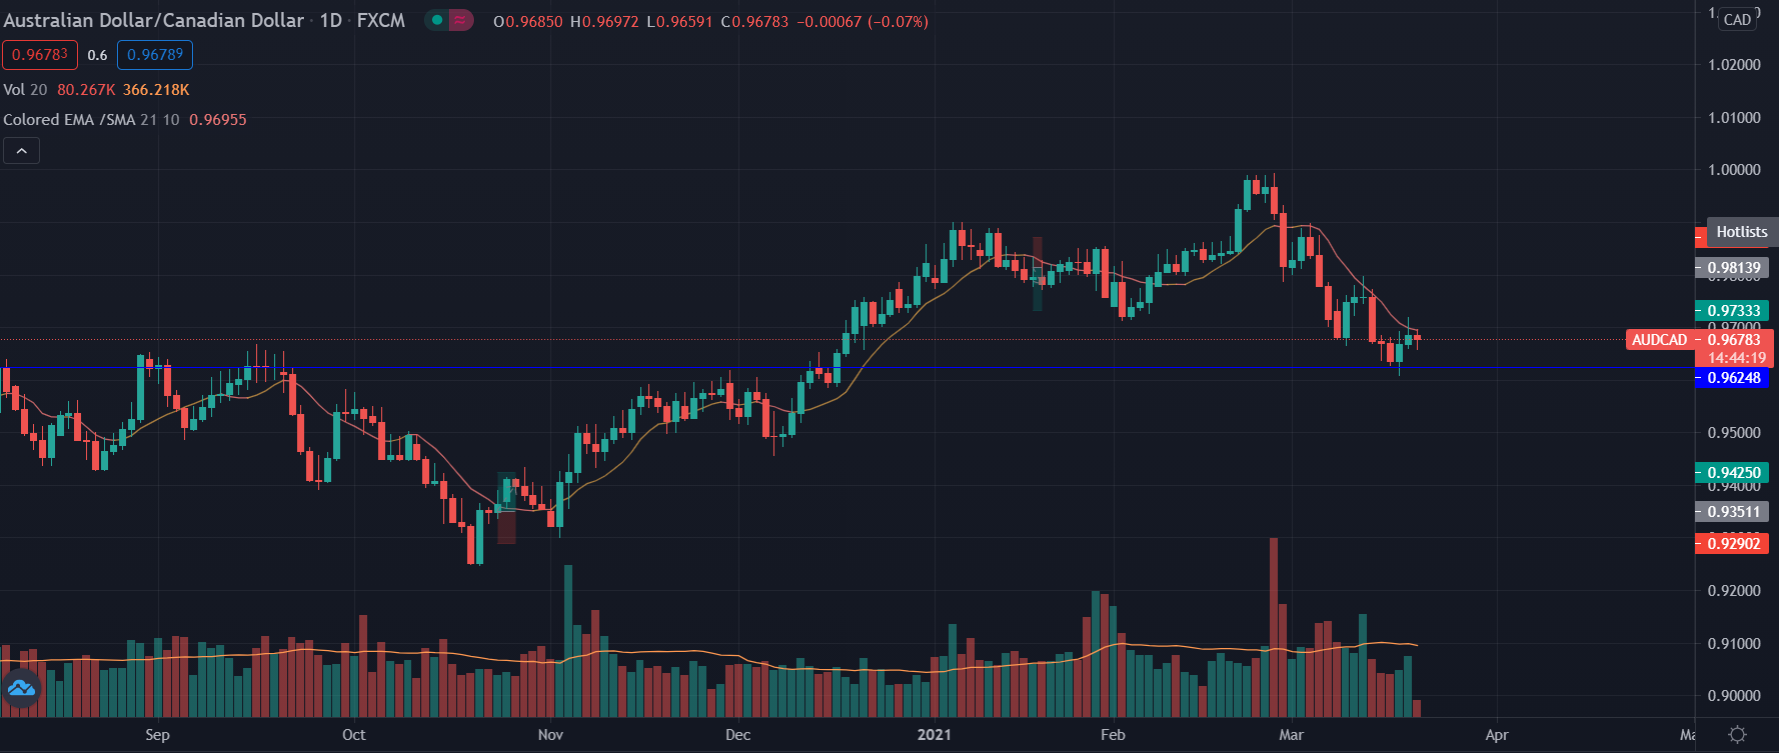 AUD/CAD H4 price action